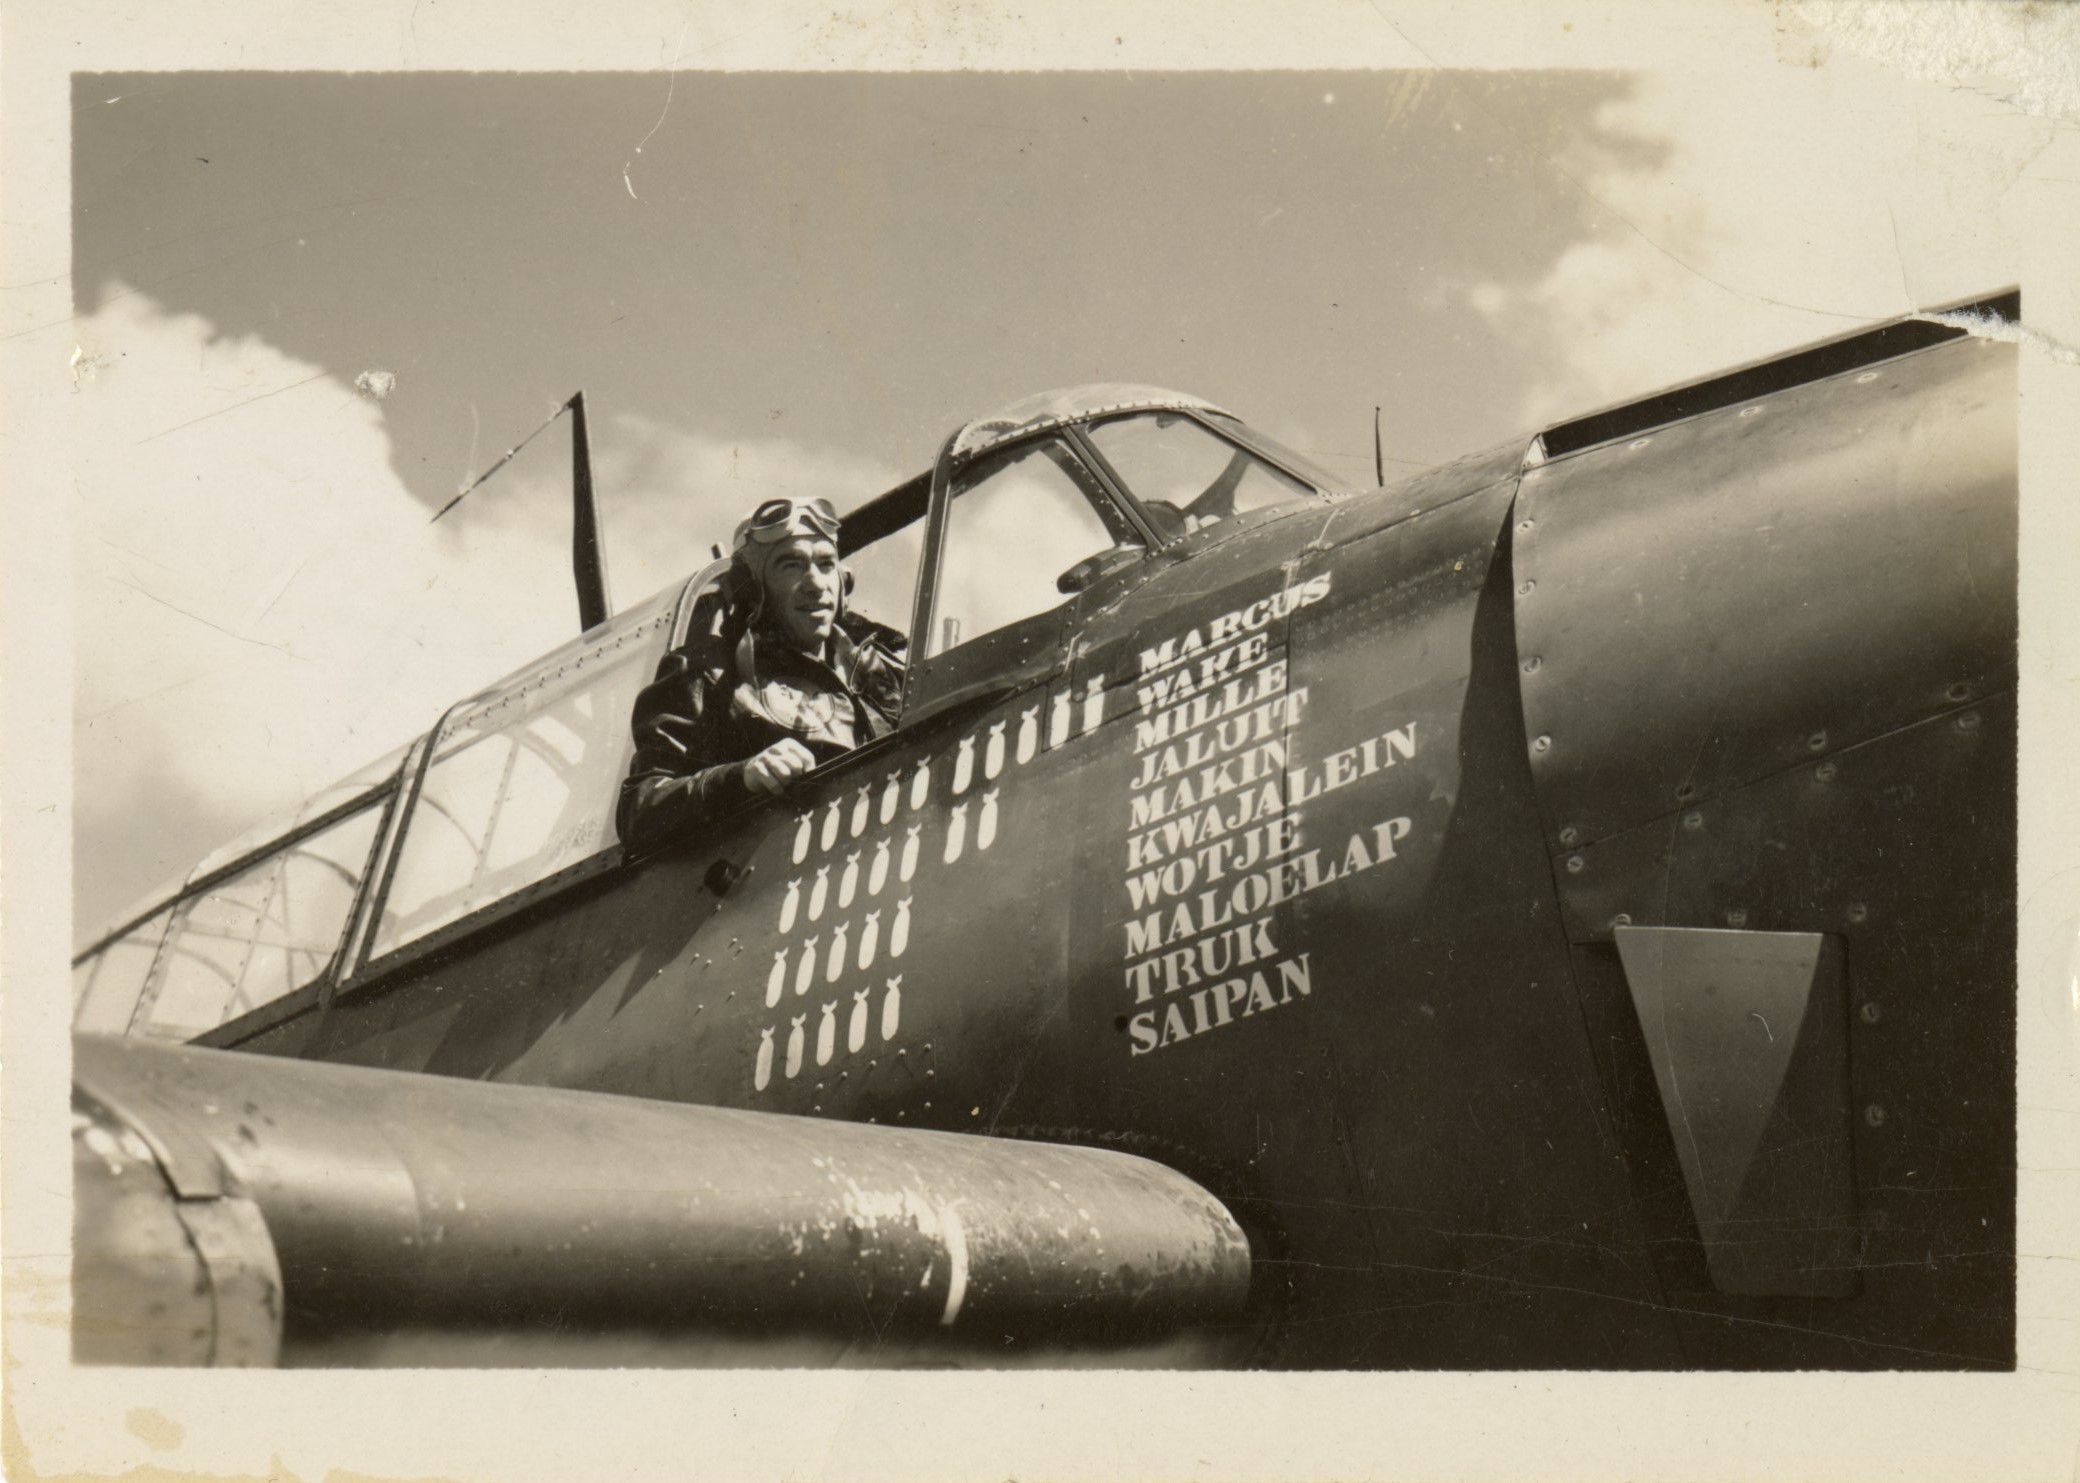 Primary image for the Wing and a Prayer: the Joseph Kristufek Collection Collection